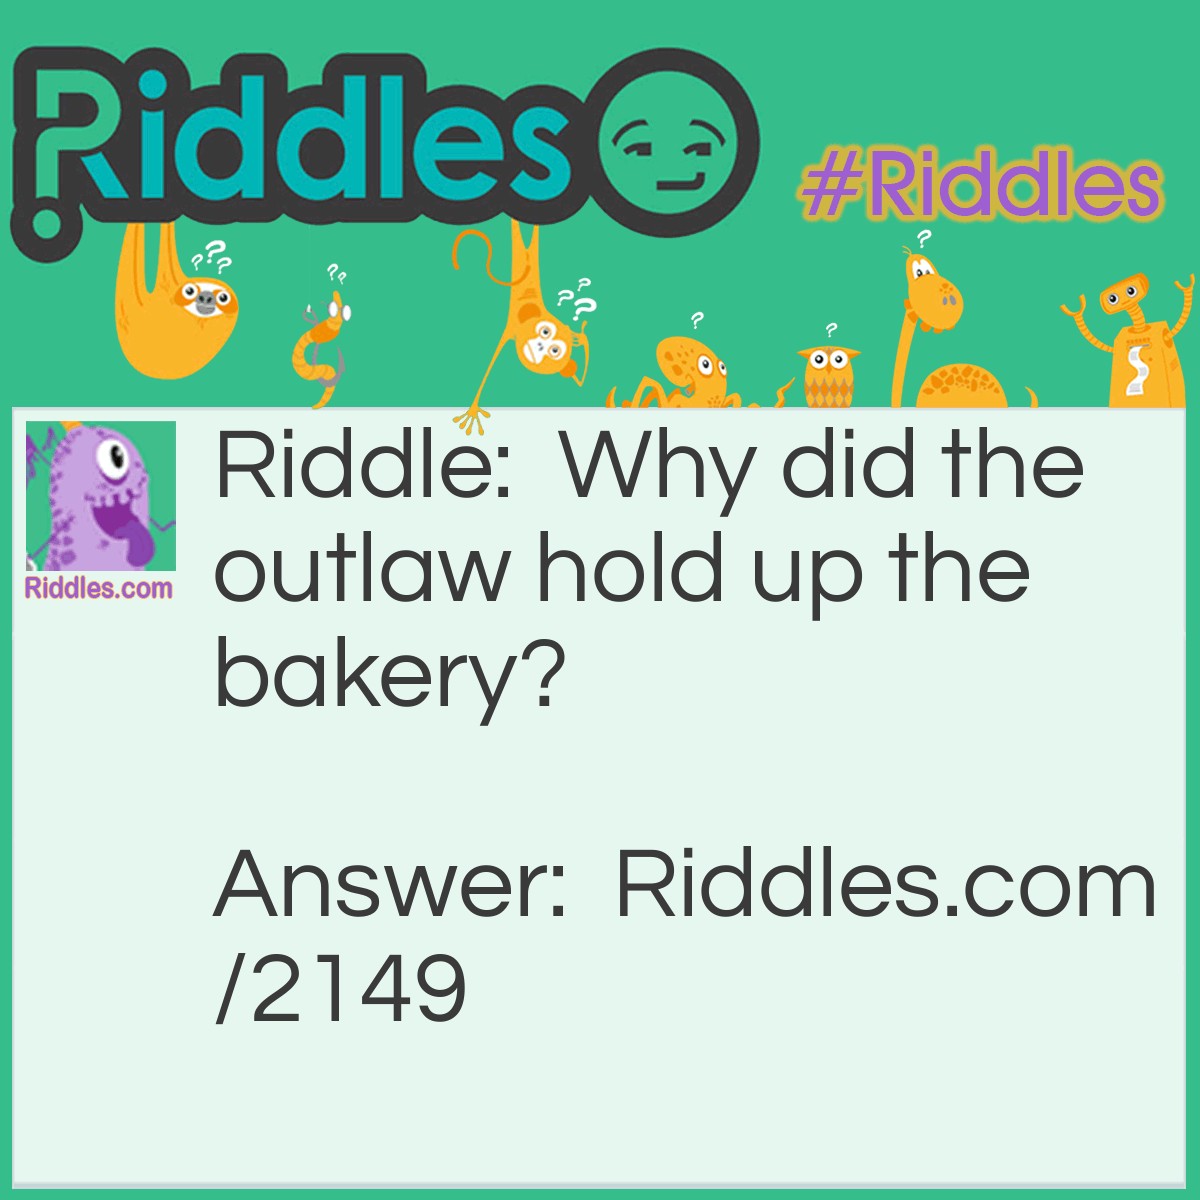 Riddle: Why did the outlaw hold up the bakery? Answer: He kneaded the dough.